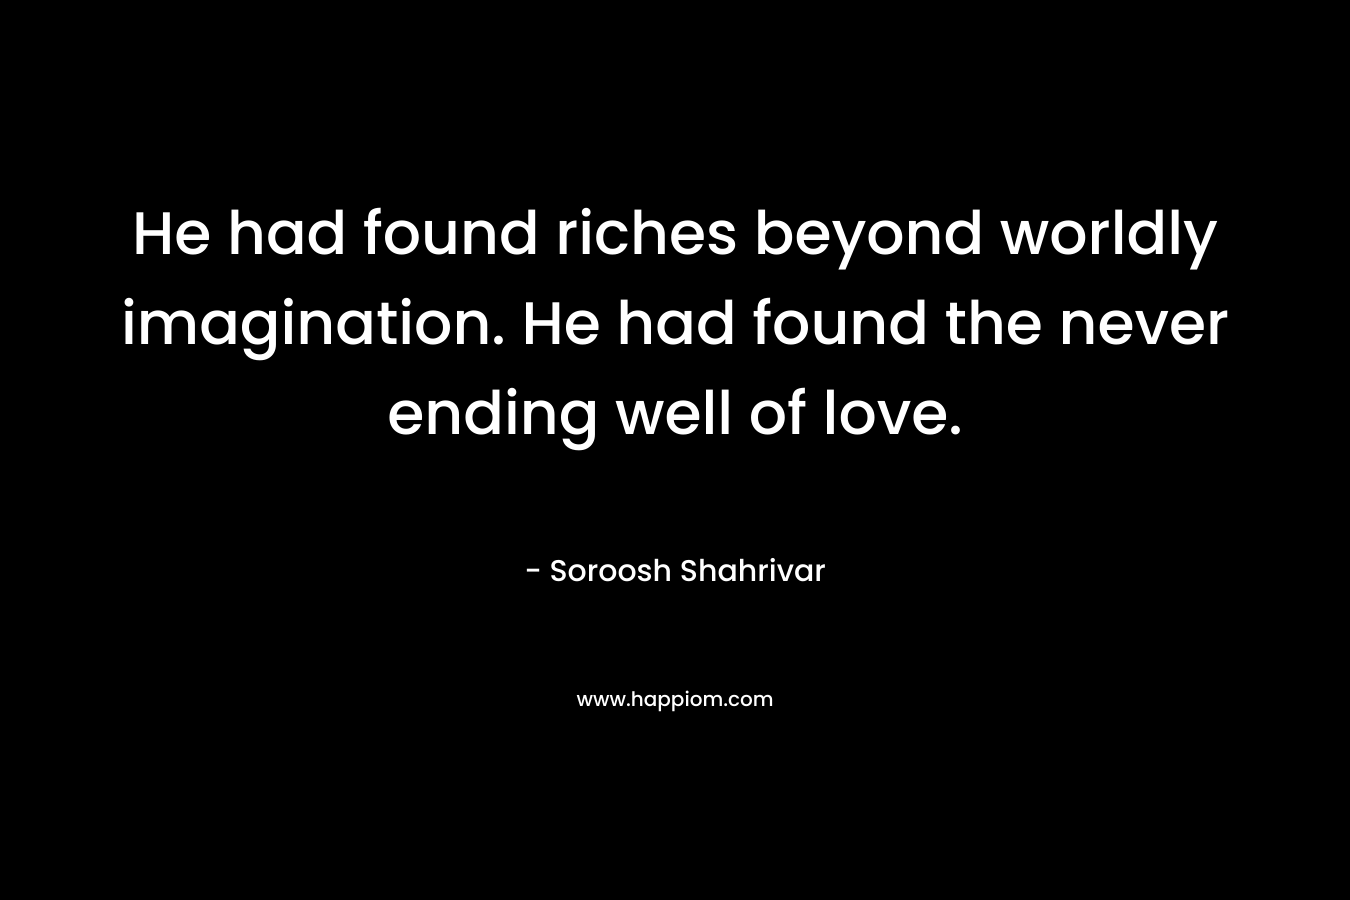 He had found riches beyond worldly imagination. He had found the never ending well of love.